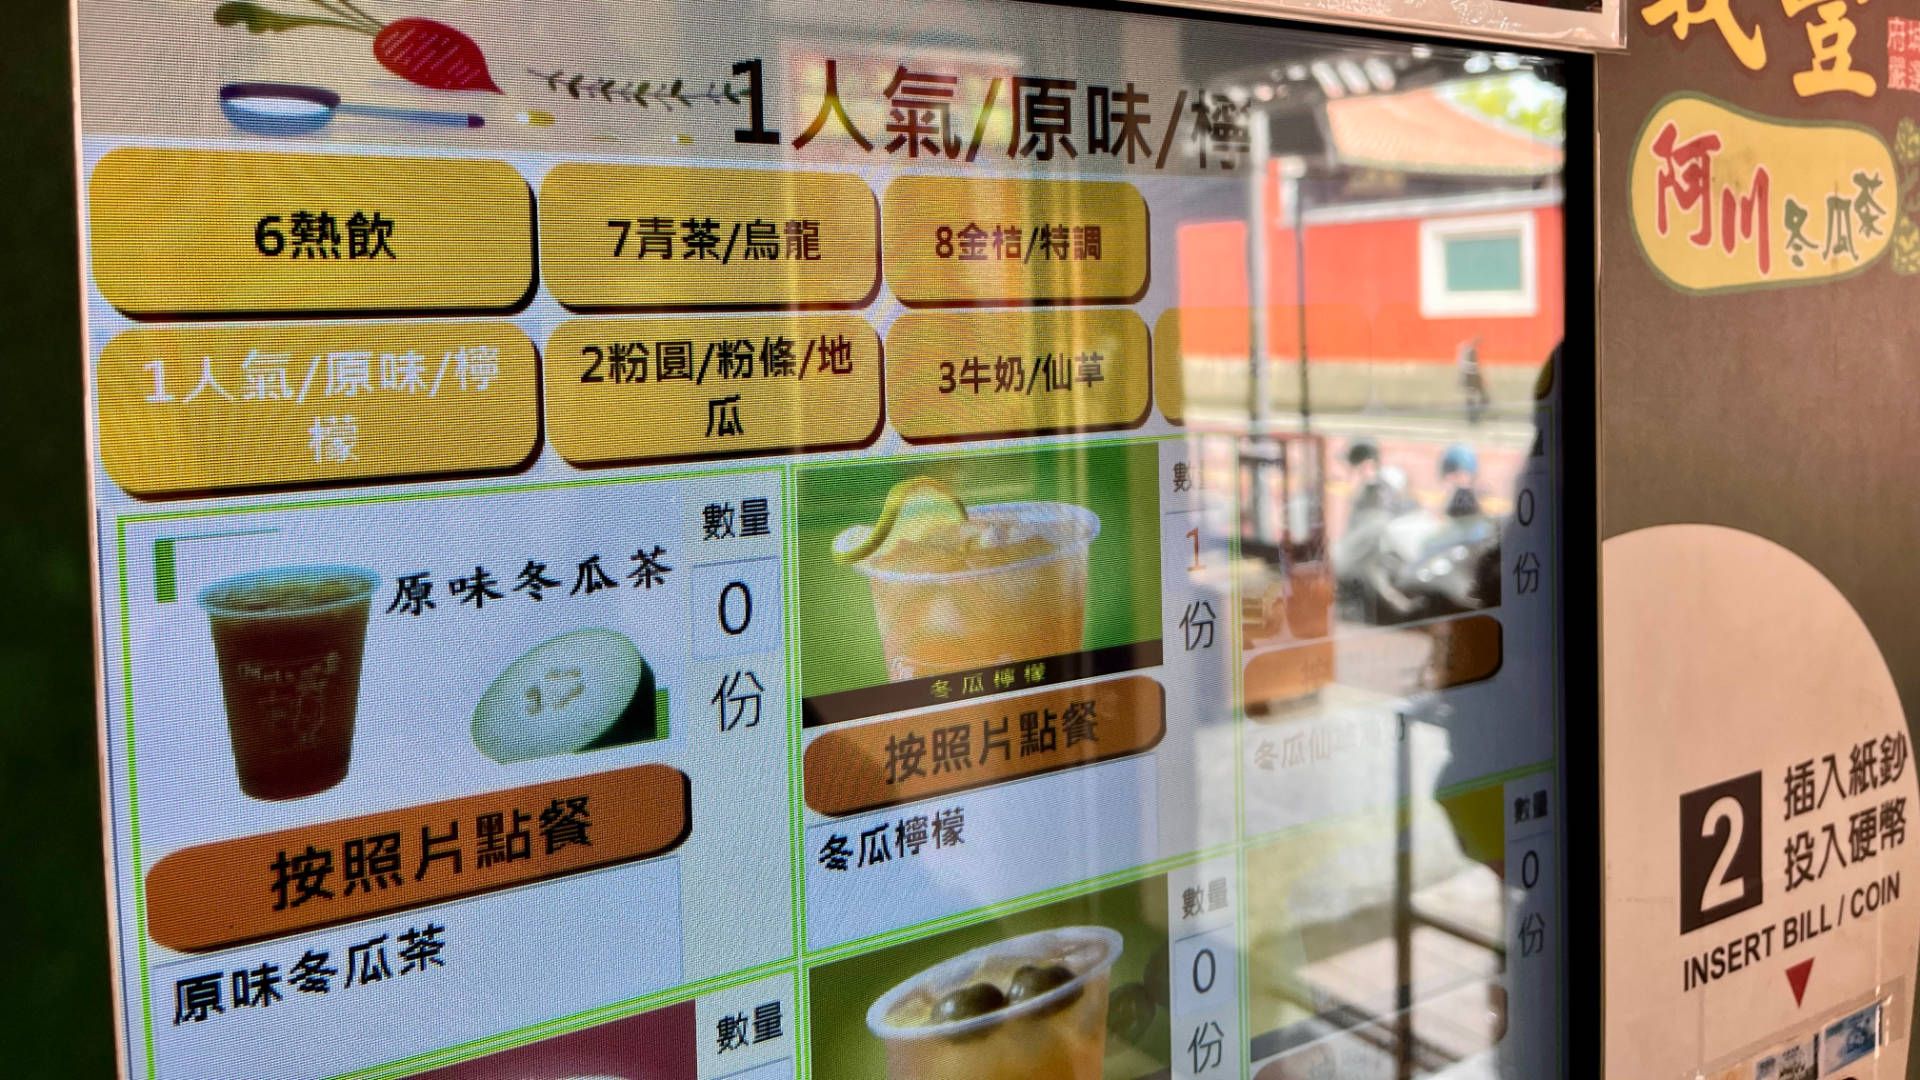 Touchscreen order system for iced tea.